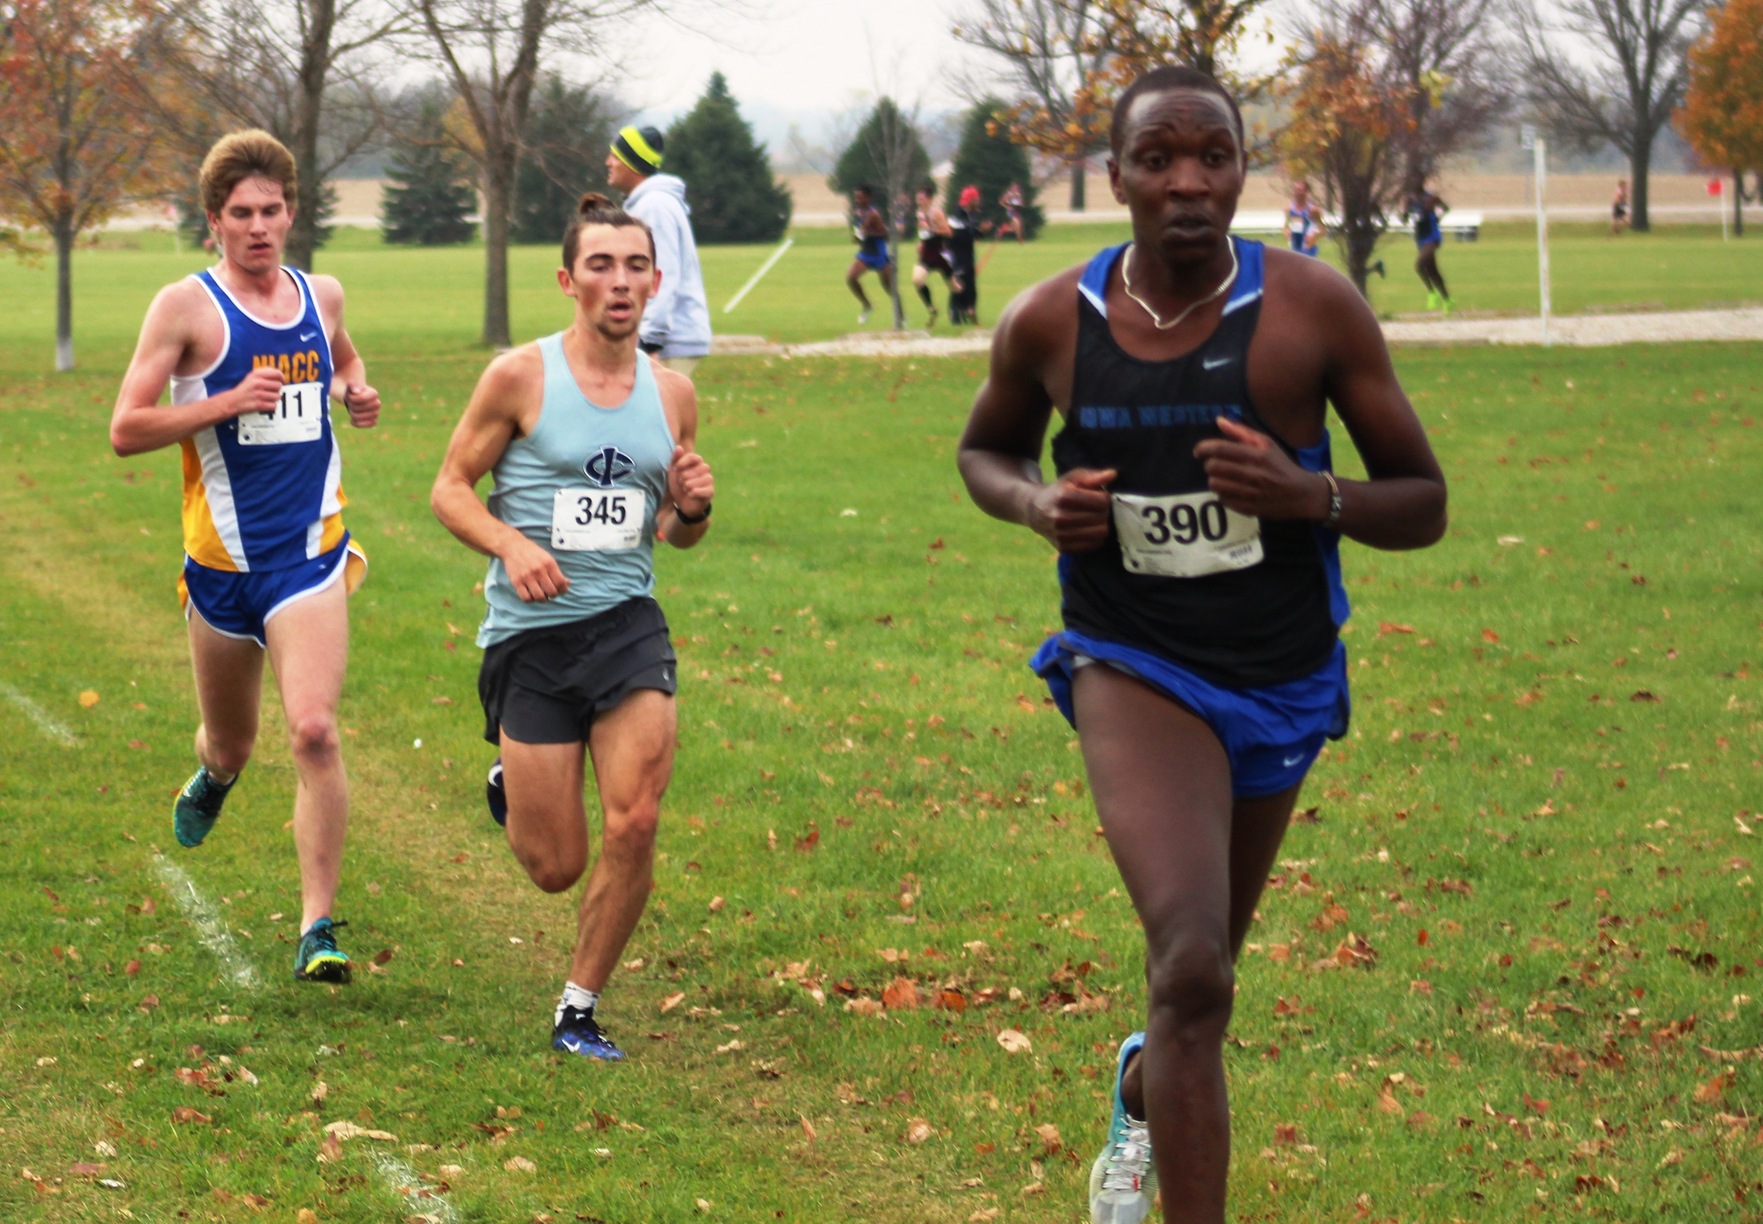 Blake Keller is one of five returning sophomores for the NIACC men's cross country team.